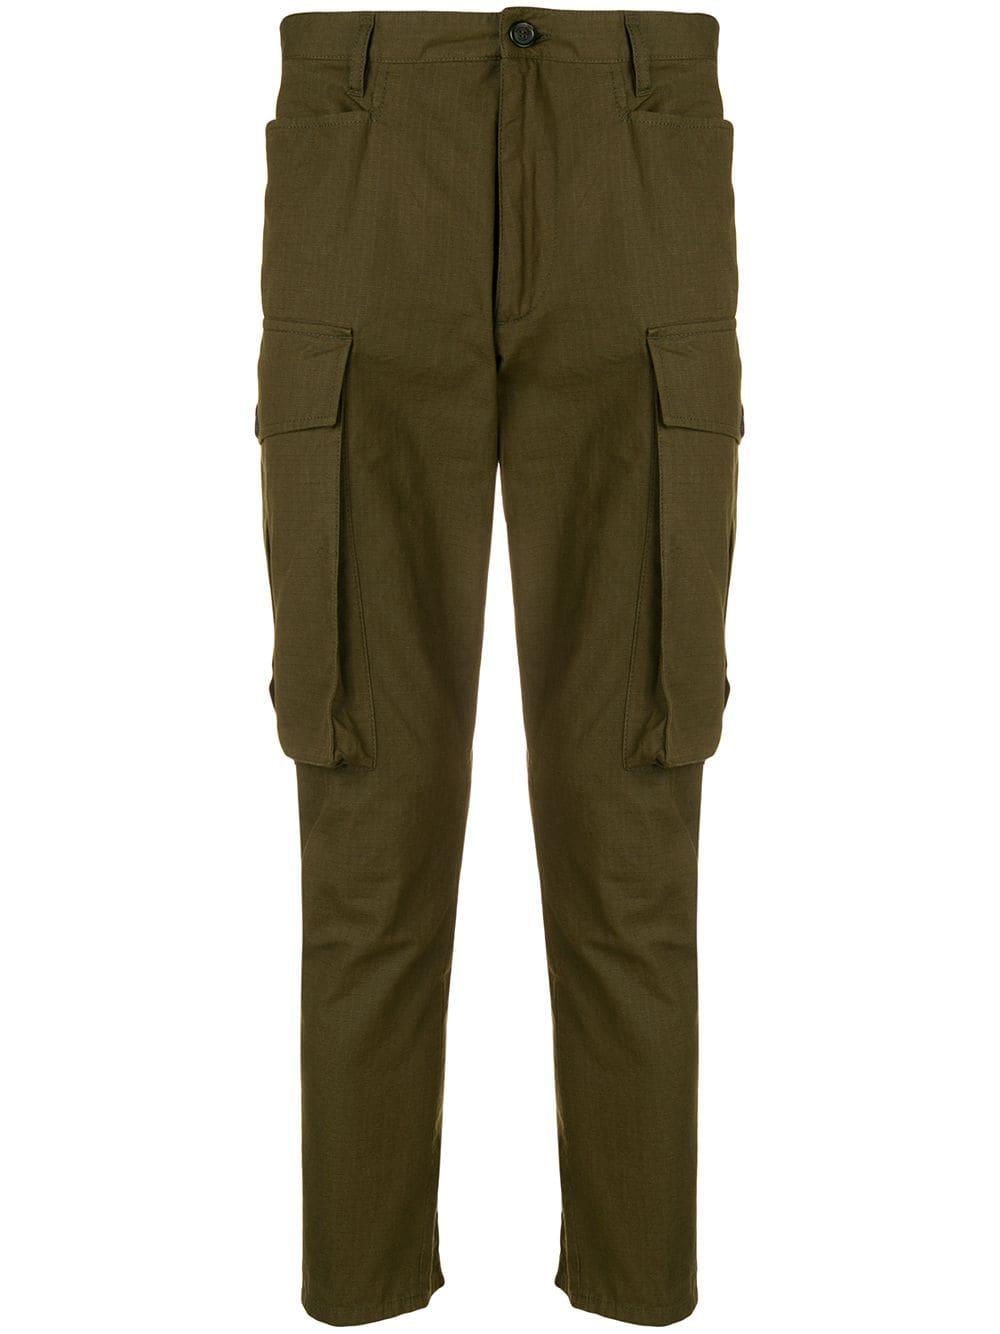 DSquared² Cotton Tapered Cargo Pants in Green for Men - Lyst